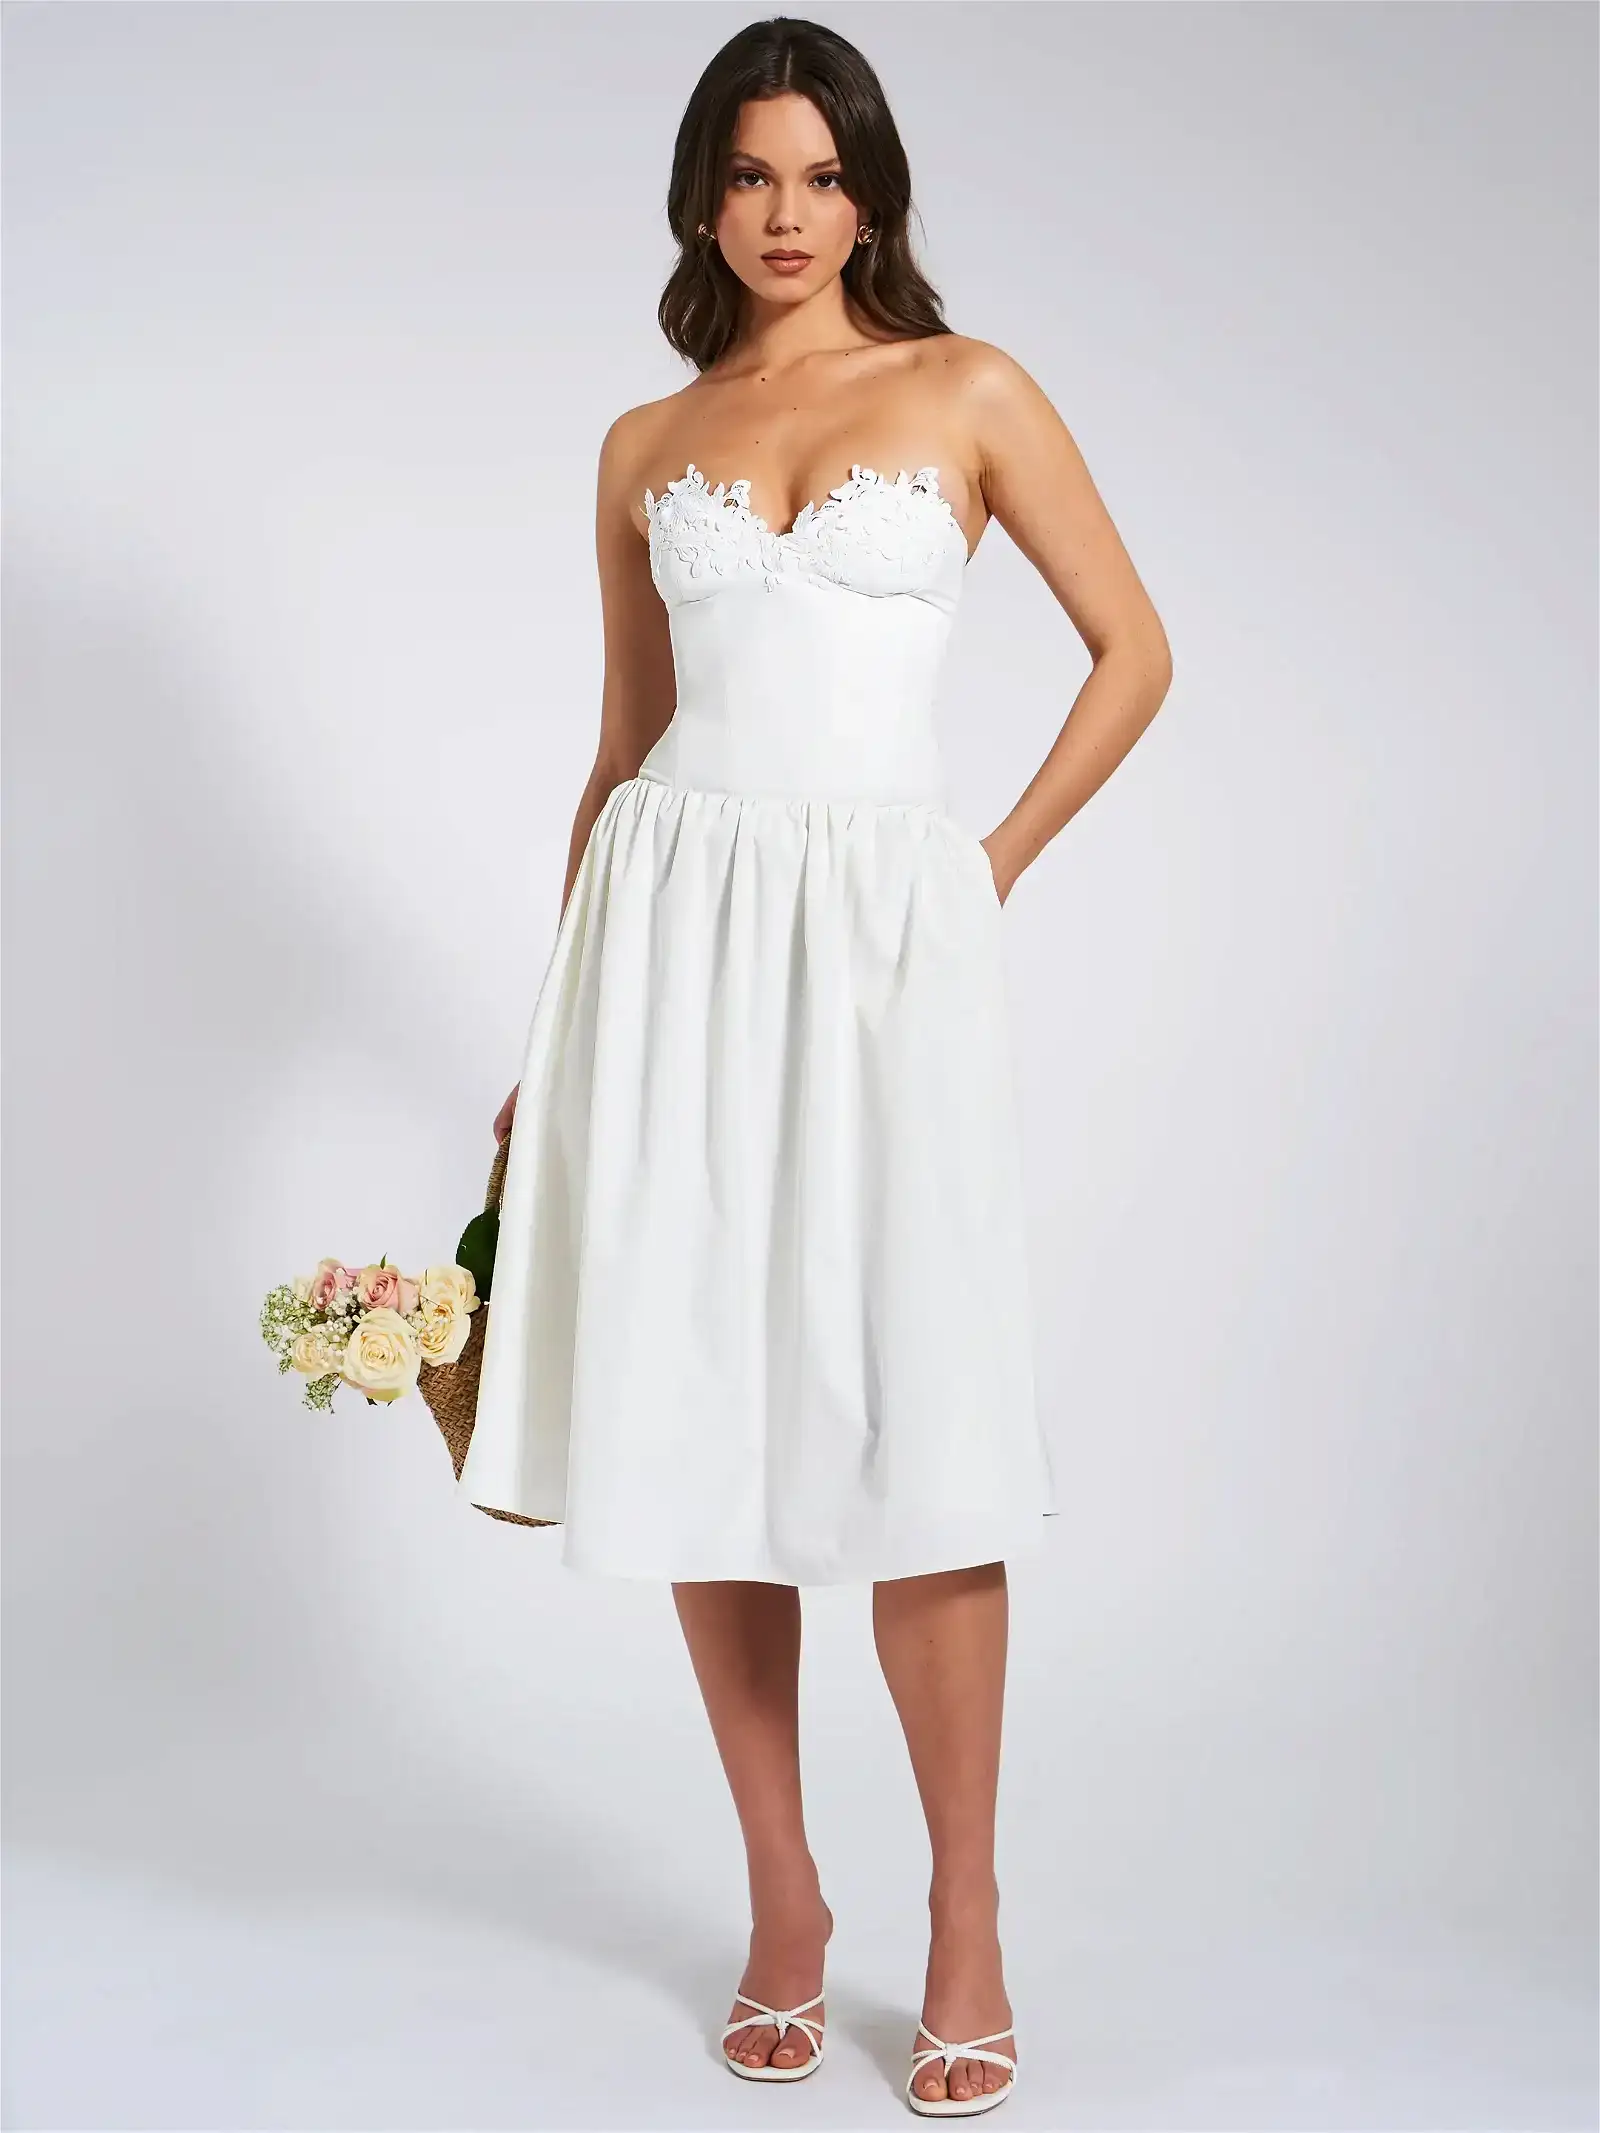 Image of Also available in white as a maxi dress \U0001f90d